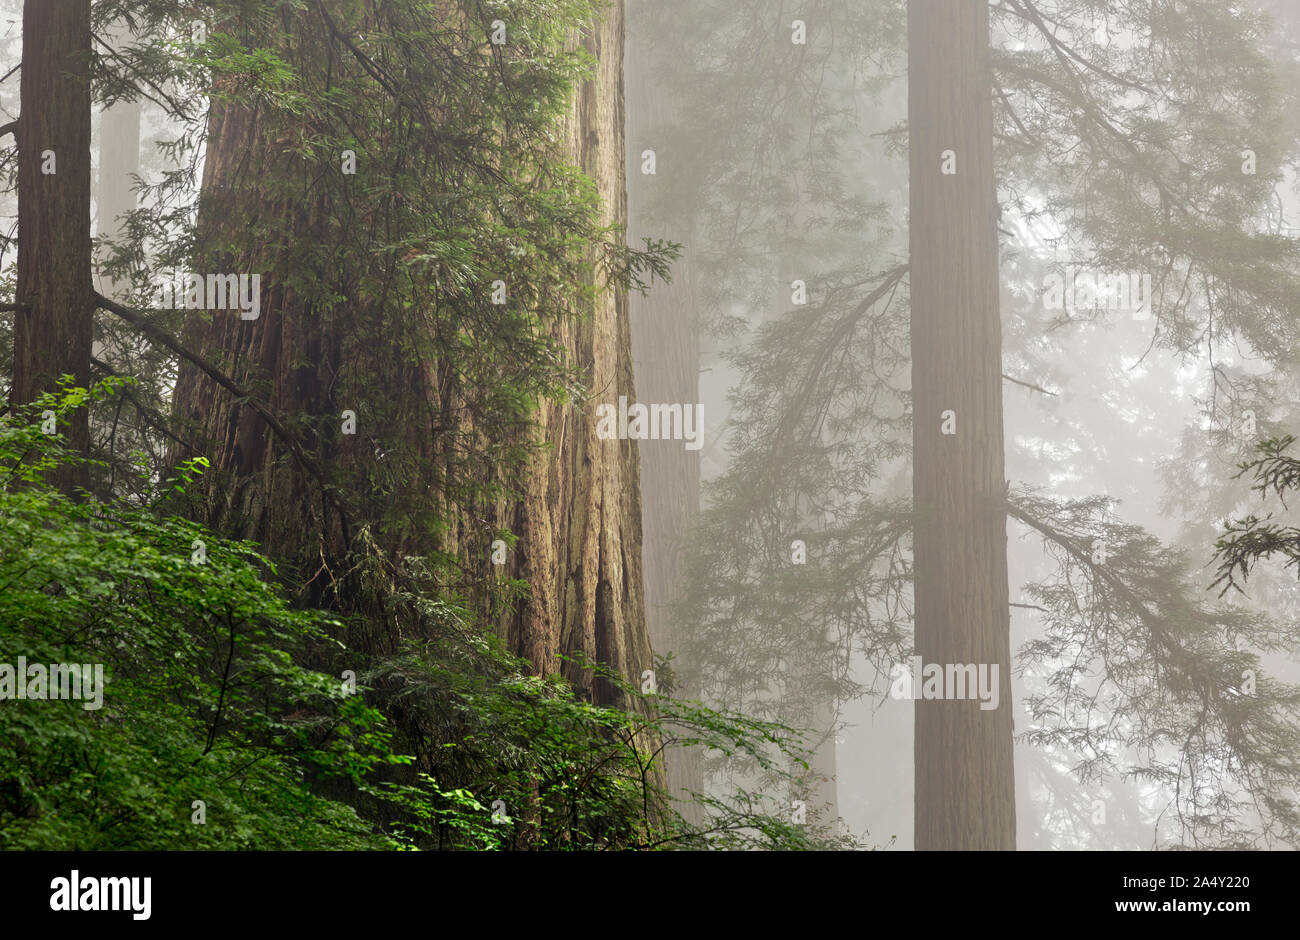 CA03692-00...CALIFORNIA - Redwood trees on a fog covered hillside in Lady Bird Johnson Grove in Redwoods National and State Parks. Stock Photo